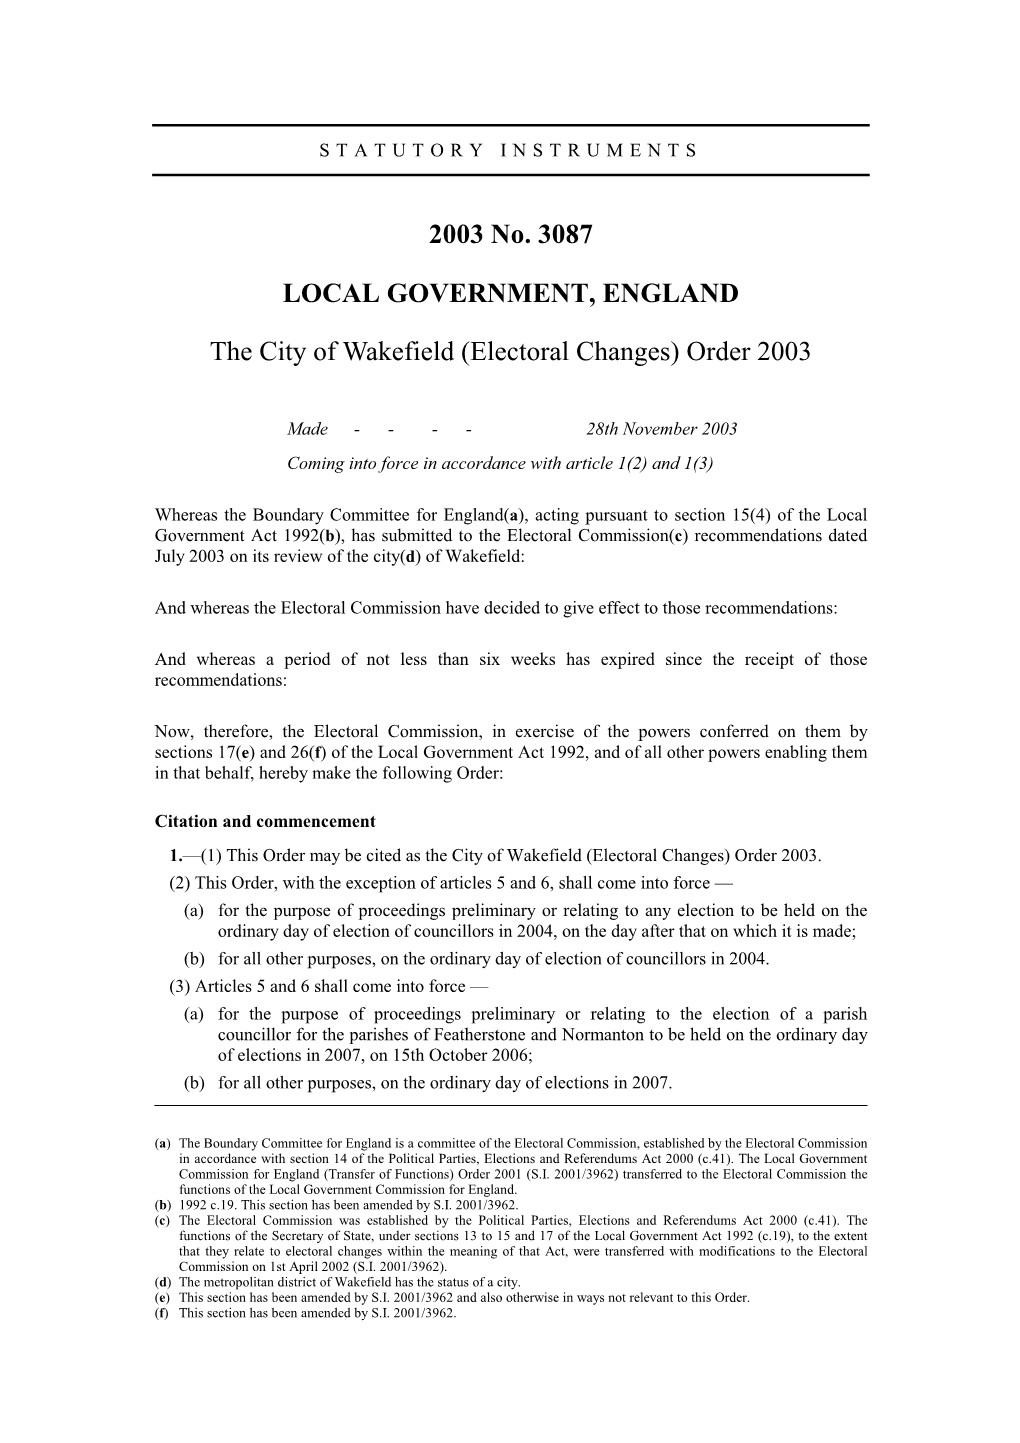 2003 No. 3087 LOCAL GOVERNMENT, ENGLAND the City of Wakefield (Electoral Changes) Order 2003